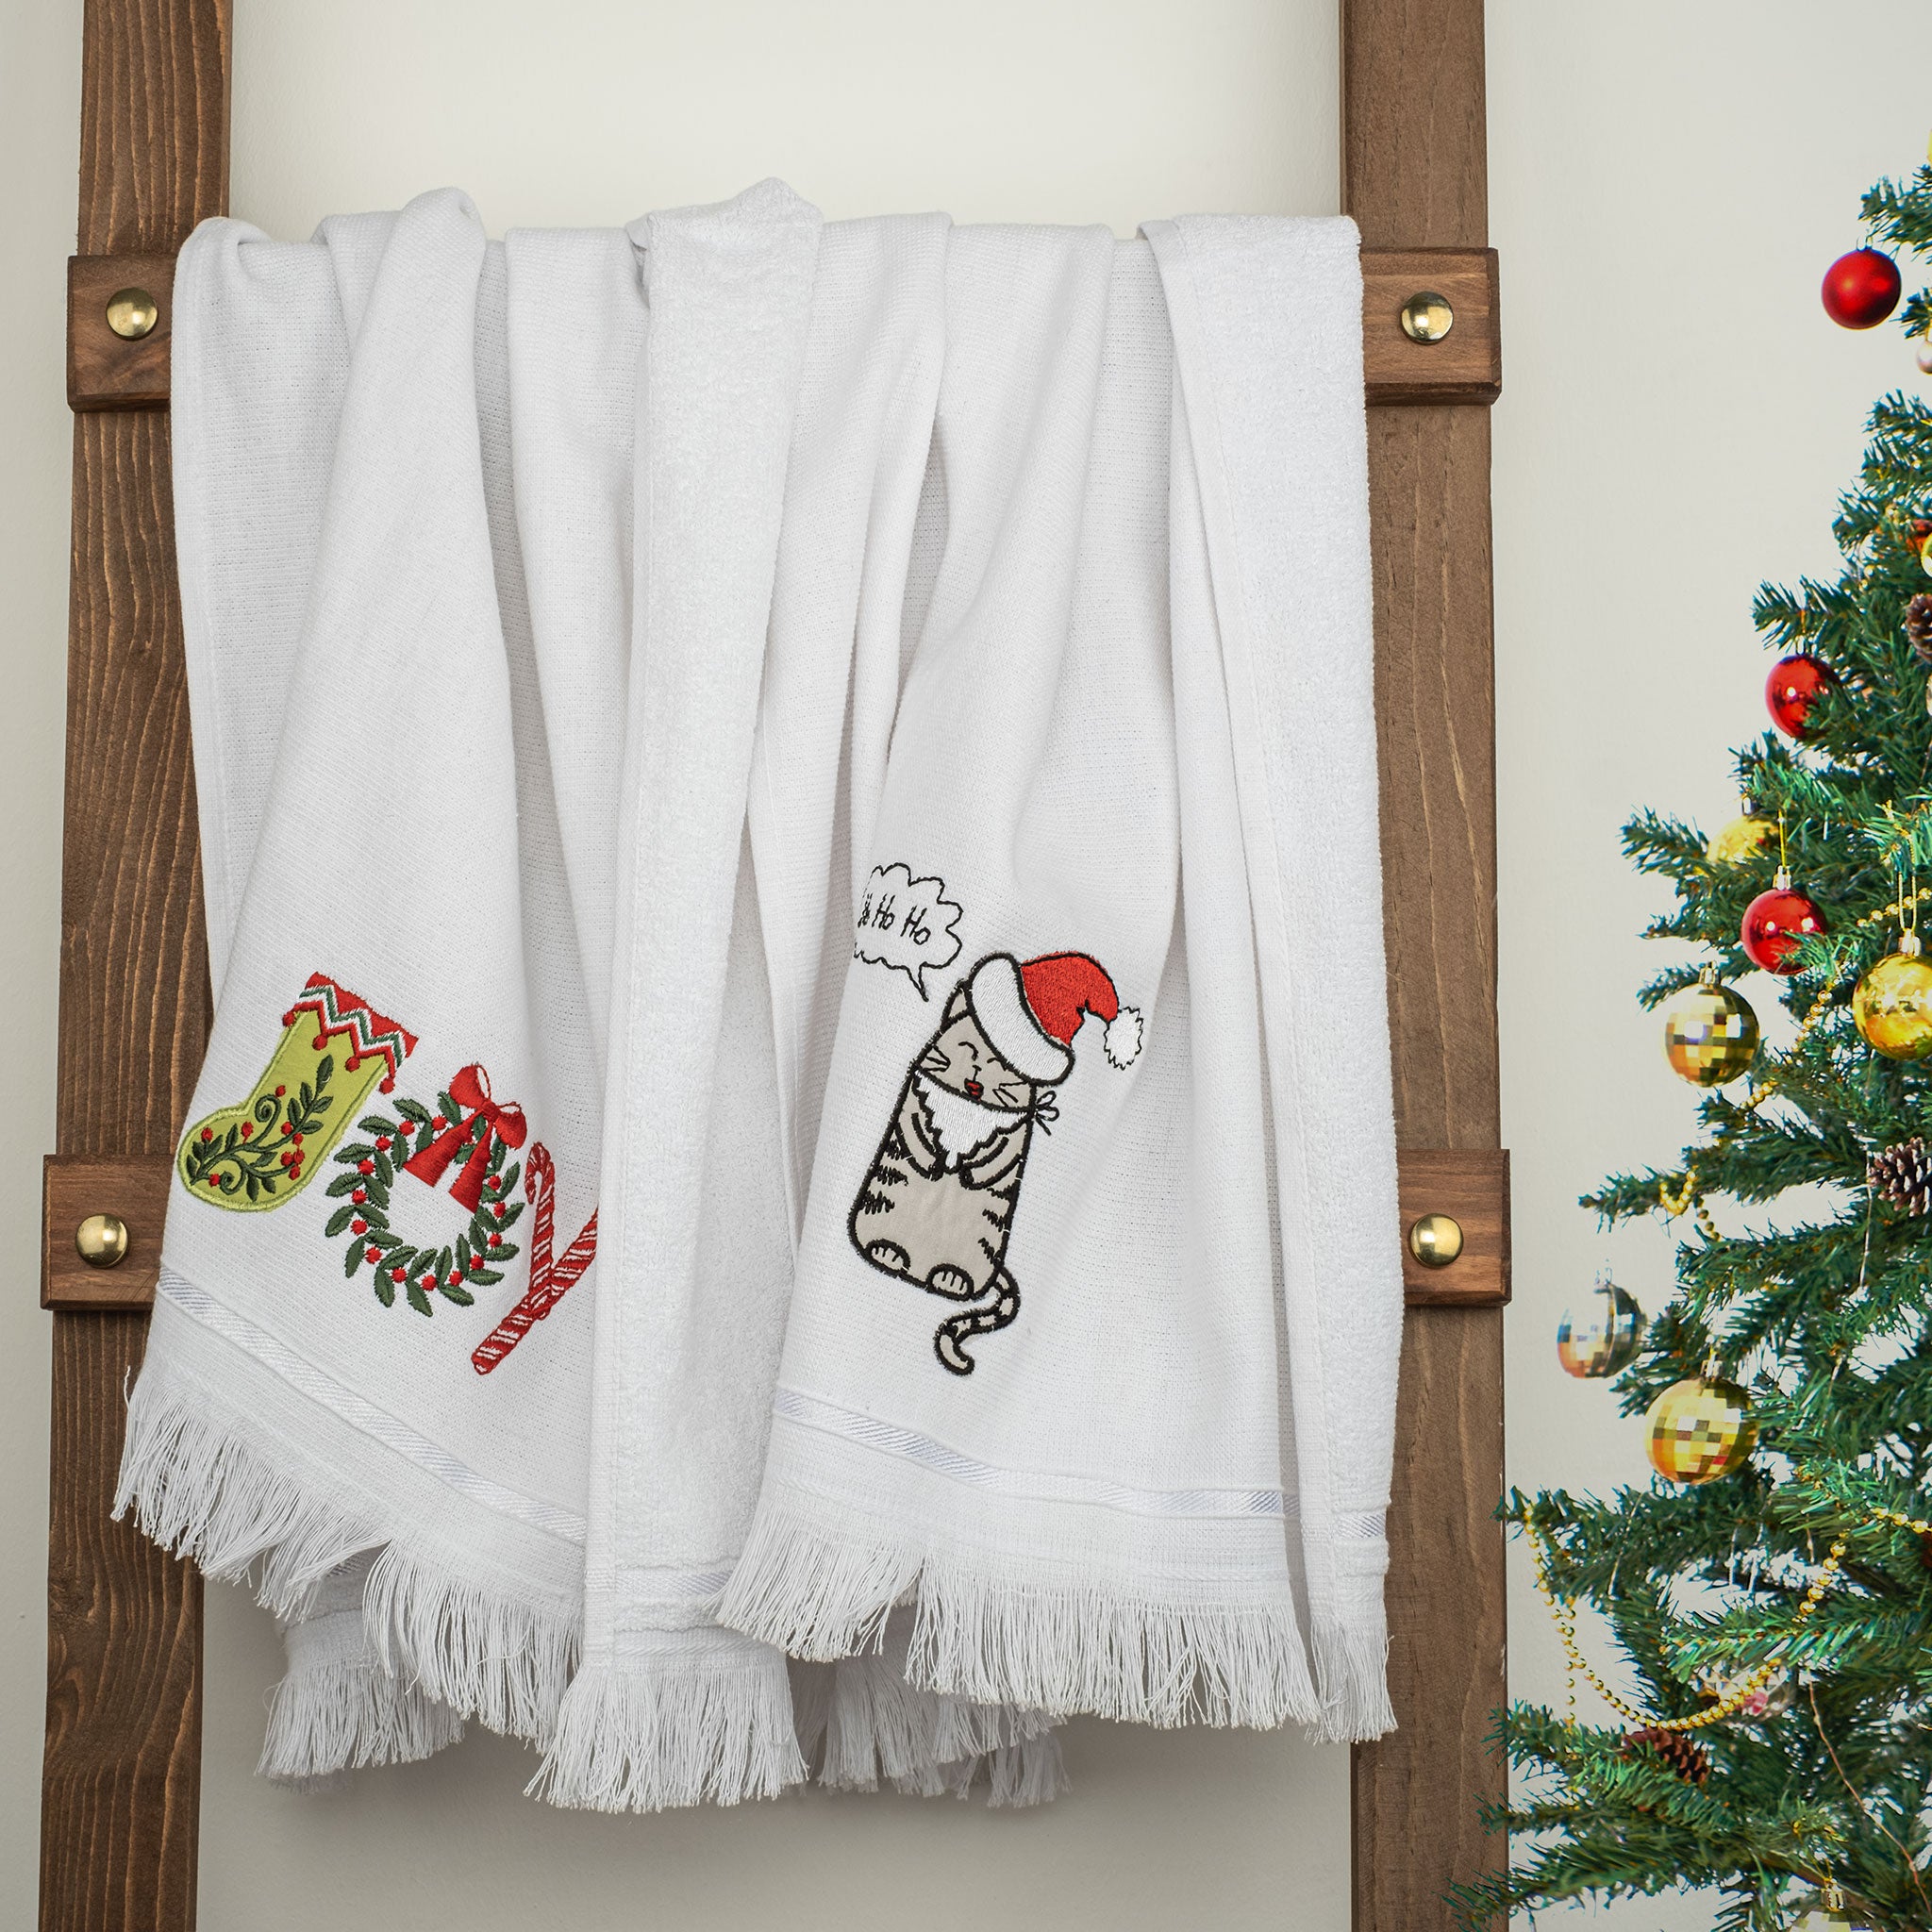  American Soft Linen - Christmas Towels Set 2 Packed Embroidered Turkish Cotton Hand Towels - Joy Cat - 4